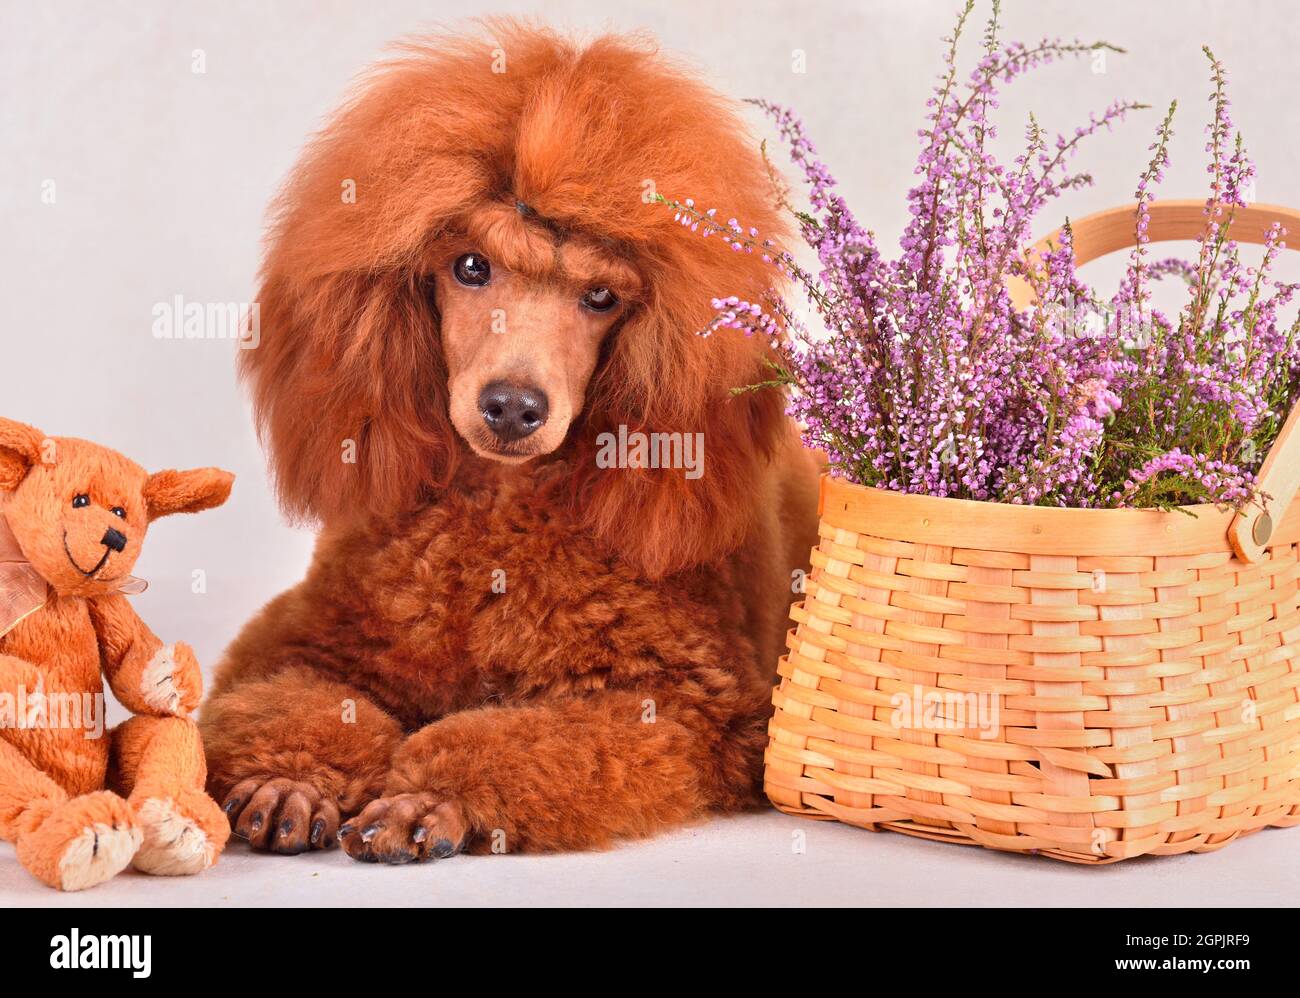 5,089 Red Toy Poodle Puppy Images, Stock Photos, 3D objects, & Vectors